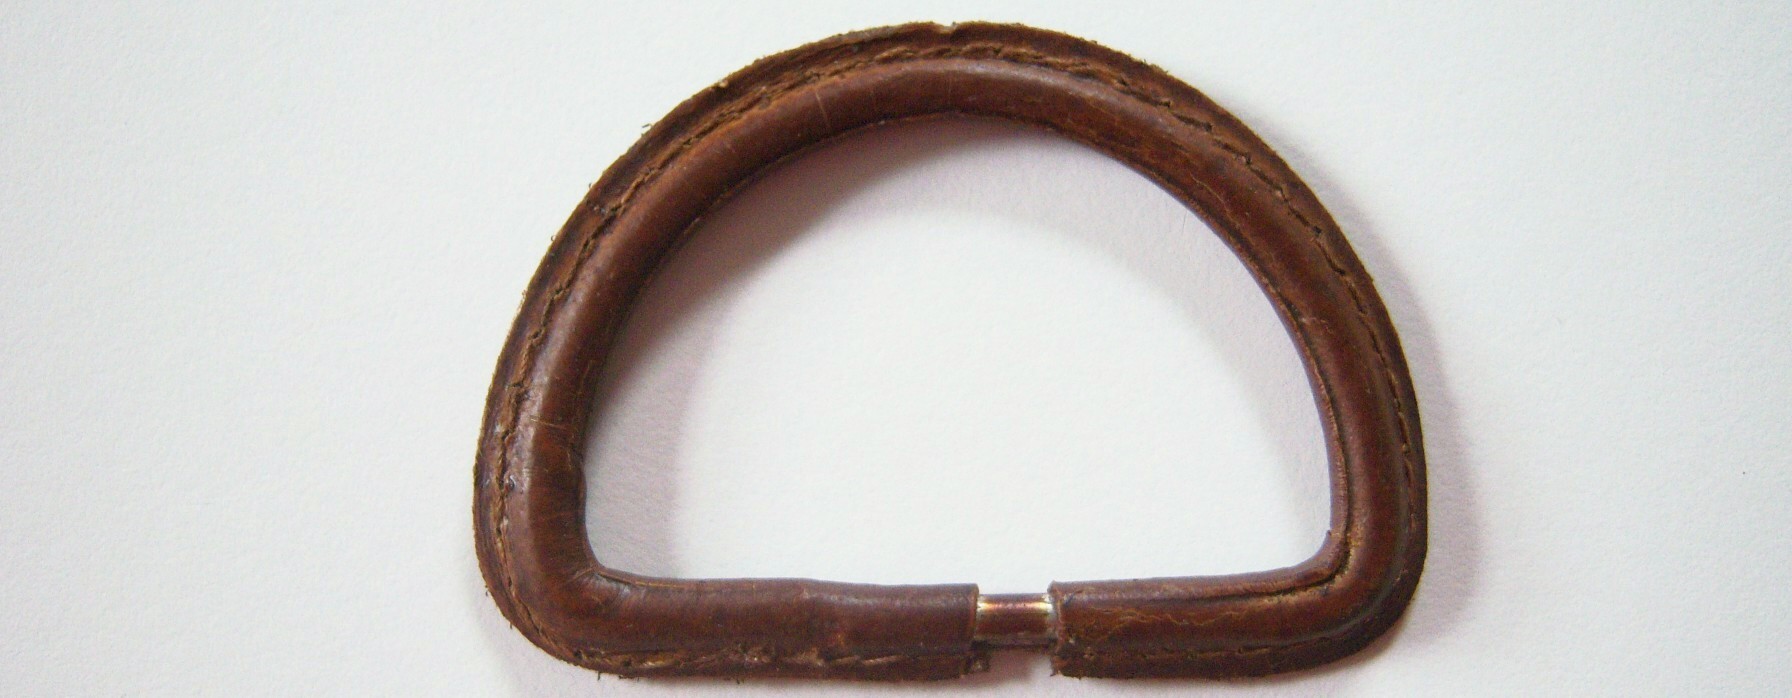 Brown 1" Bar Leather 1 3/4""x2 1/2" Buckle